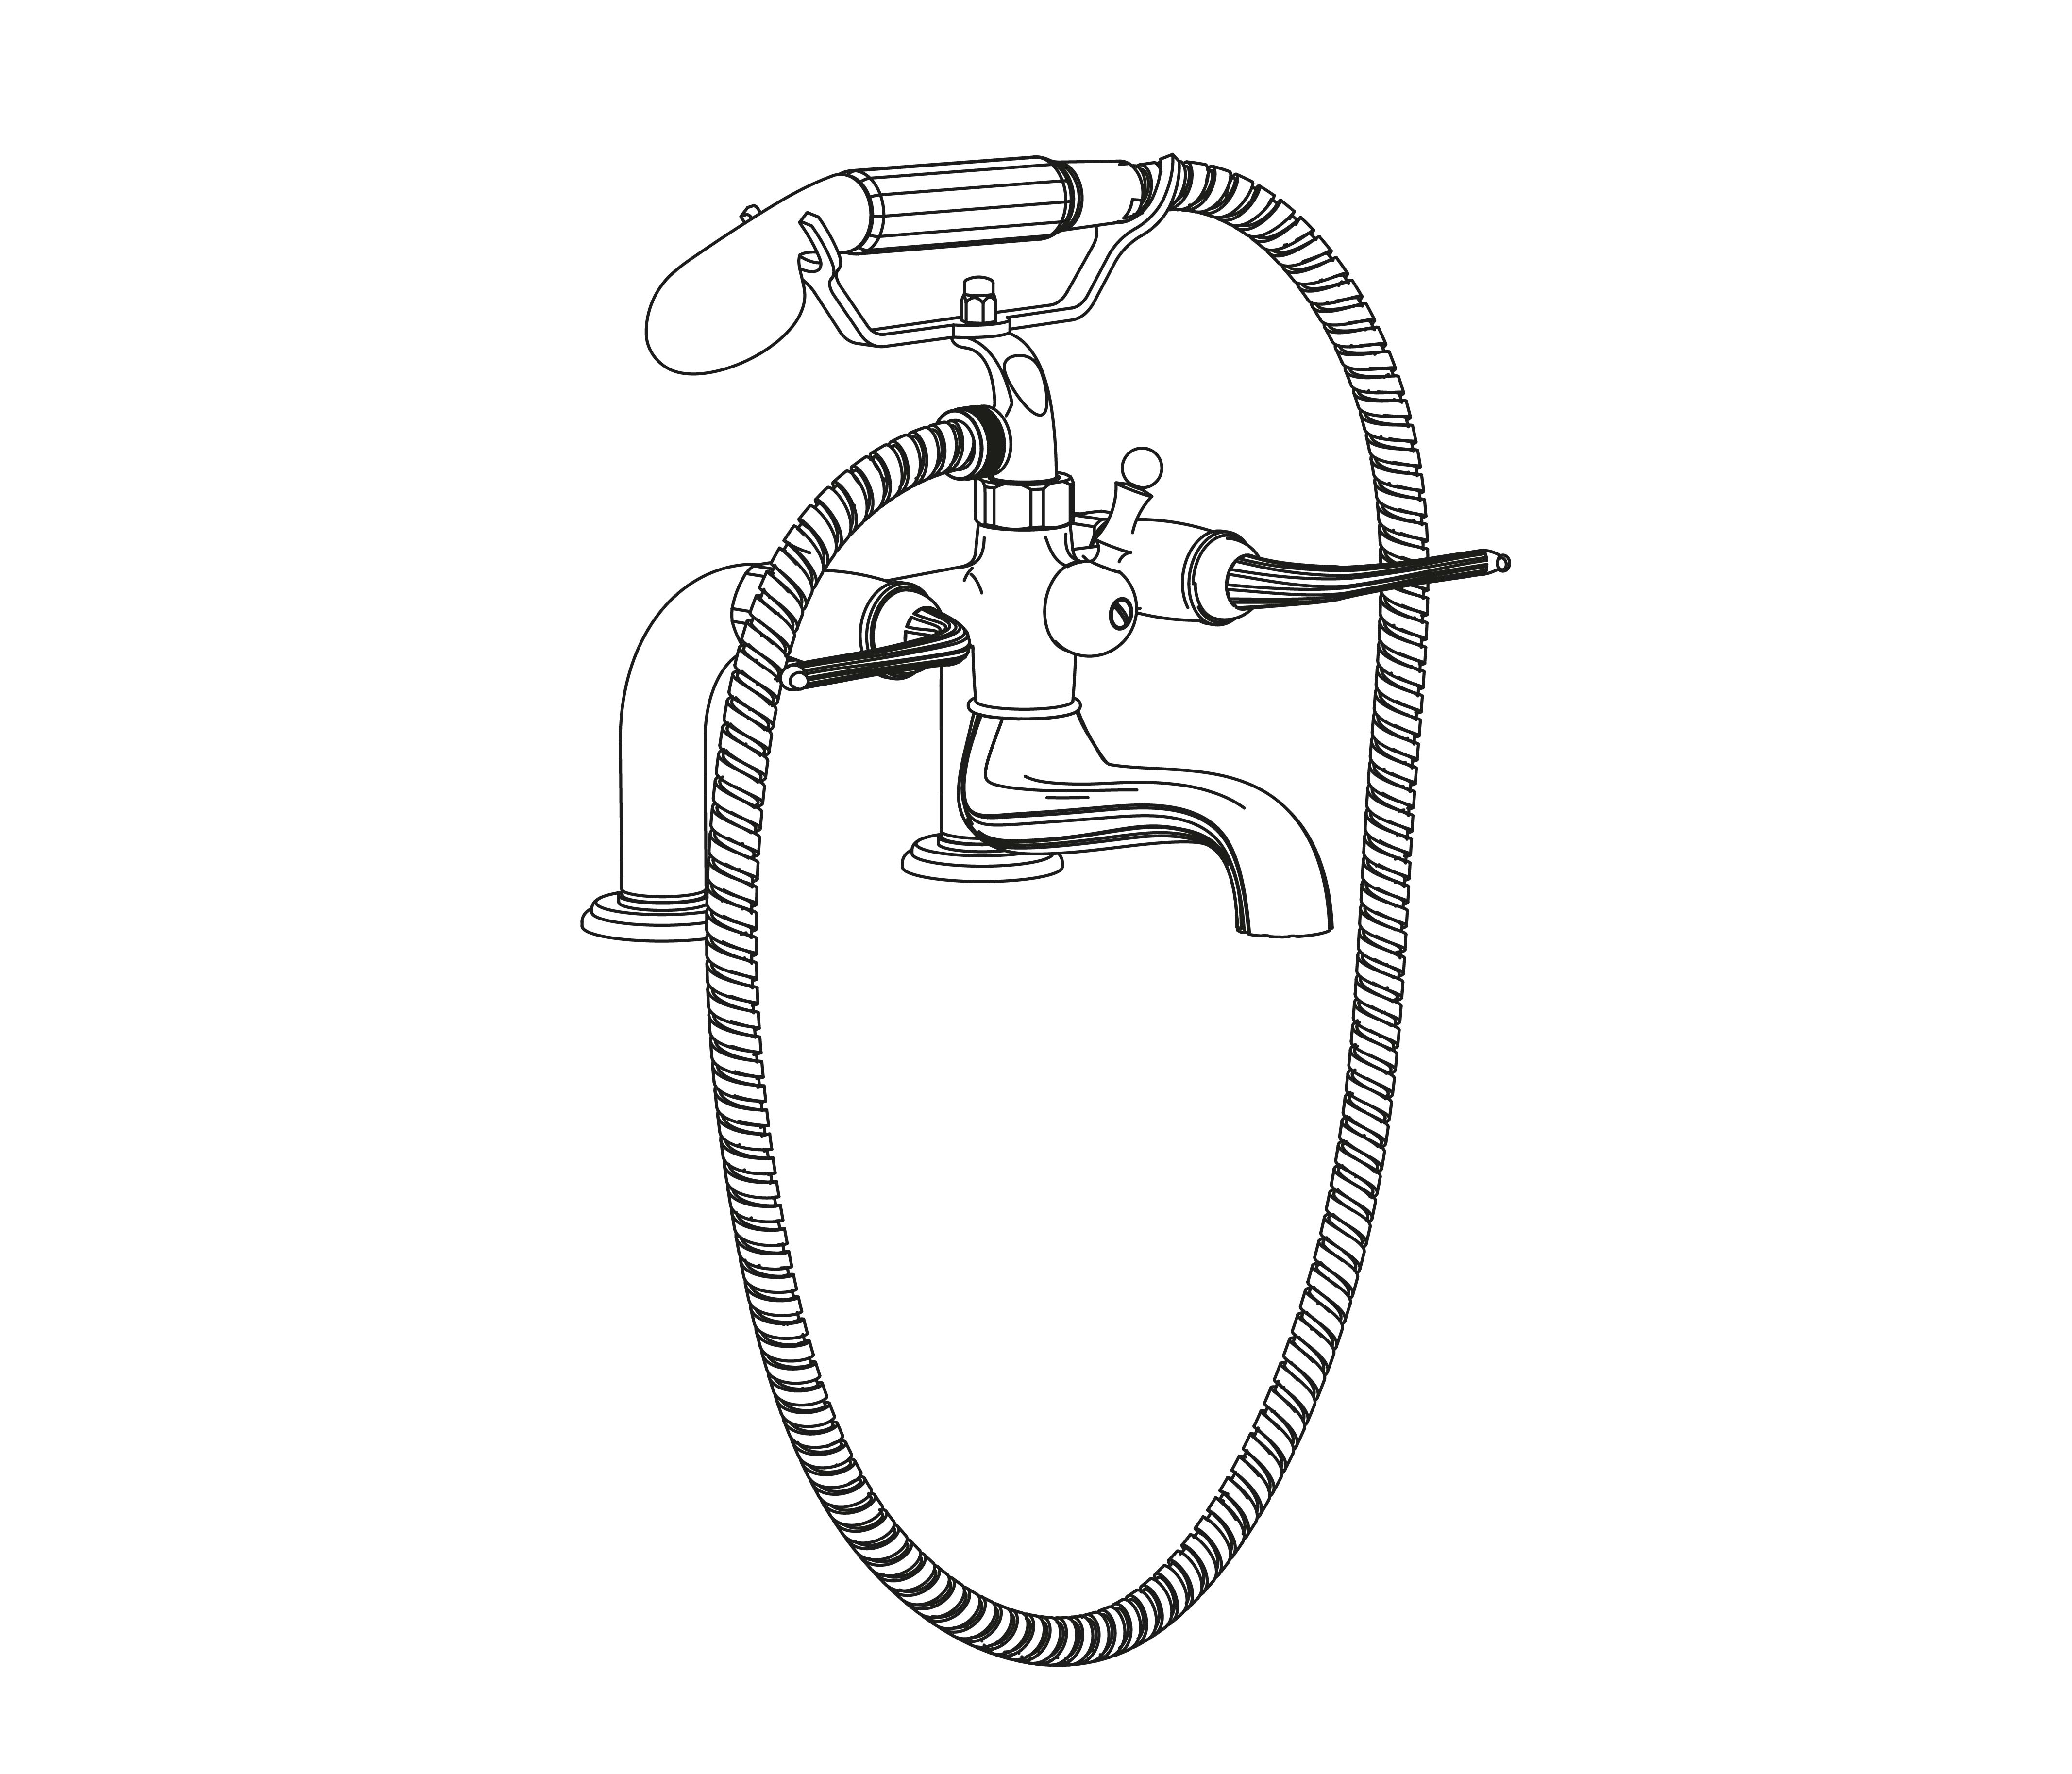 C69-3306 Rim mounted bath and shower mixer